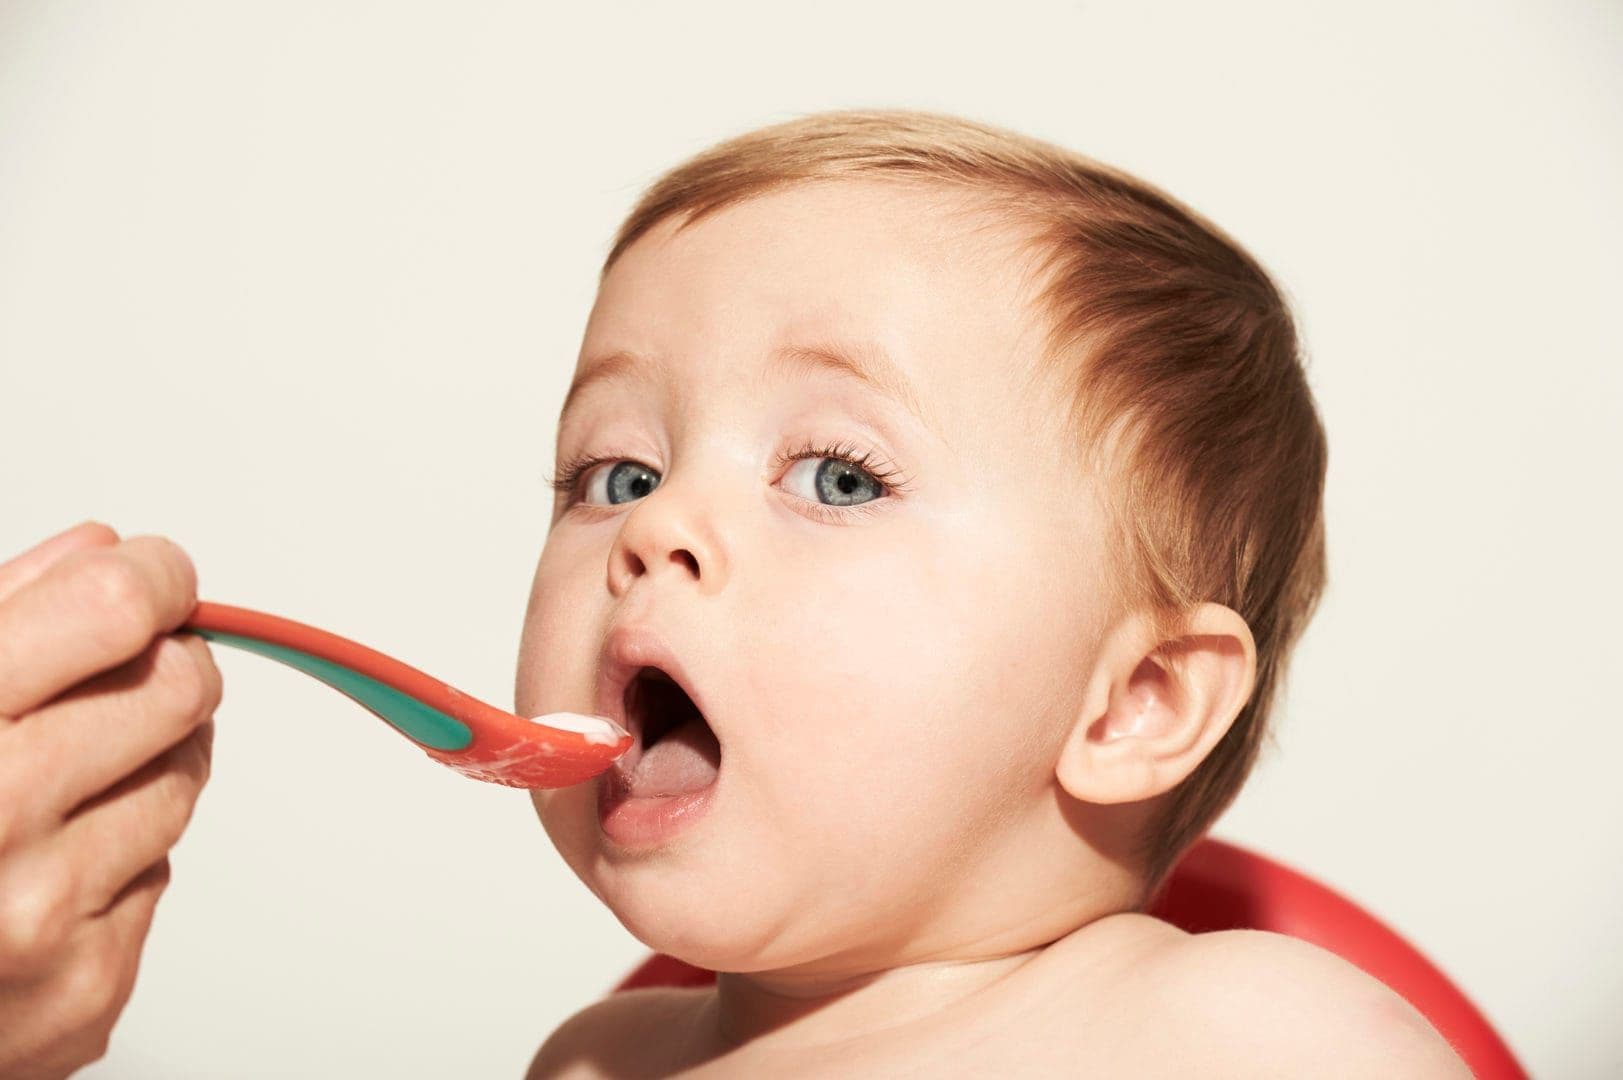 Feeding your baby: When to start with solid foods